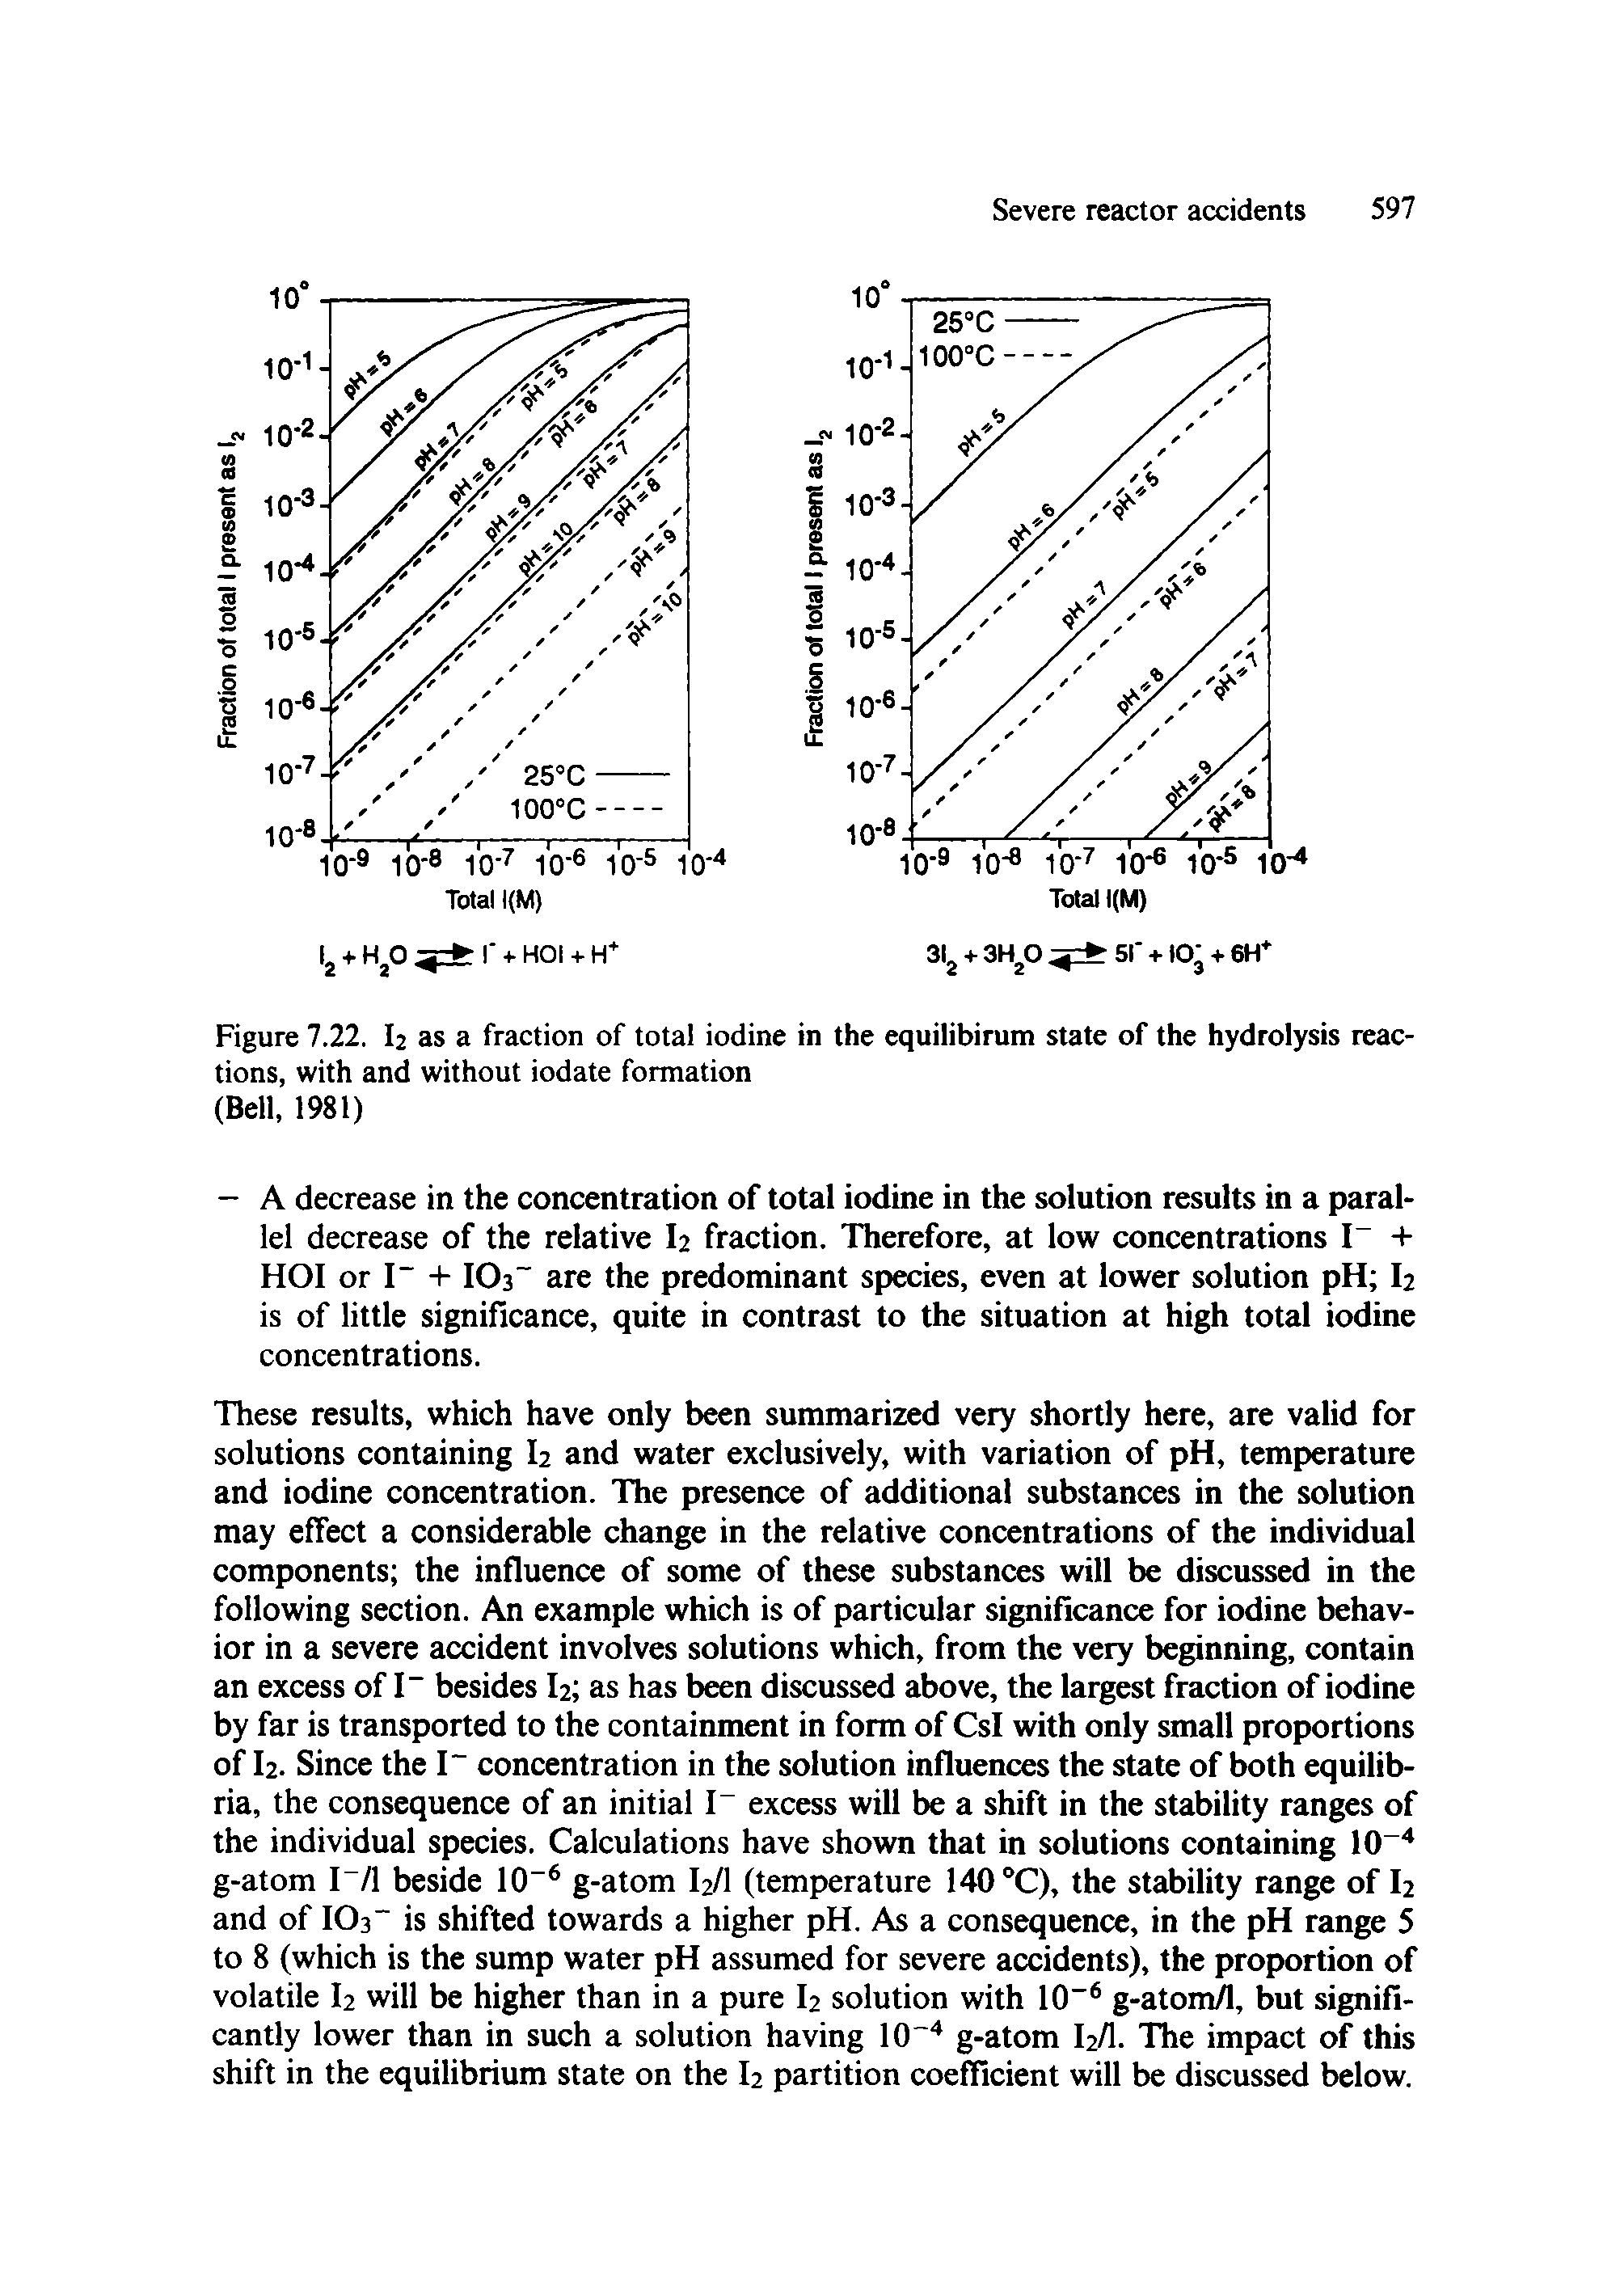 Figure 7.22. I2 as a fraction of total iodine in the equilibirum state of the hydrolysis reactions, with and without iodate formation (Bell, 1981)...